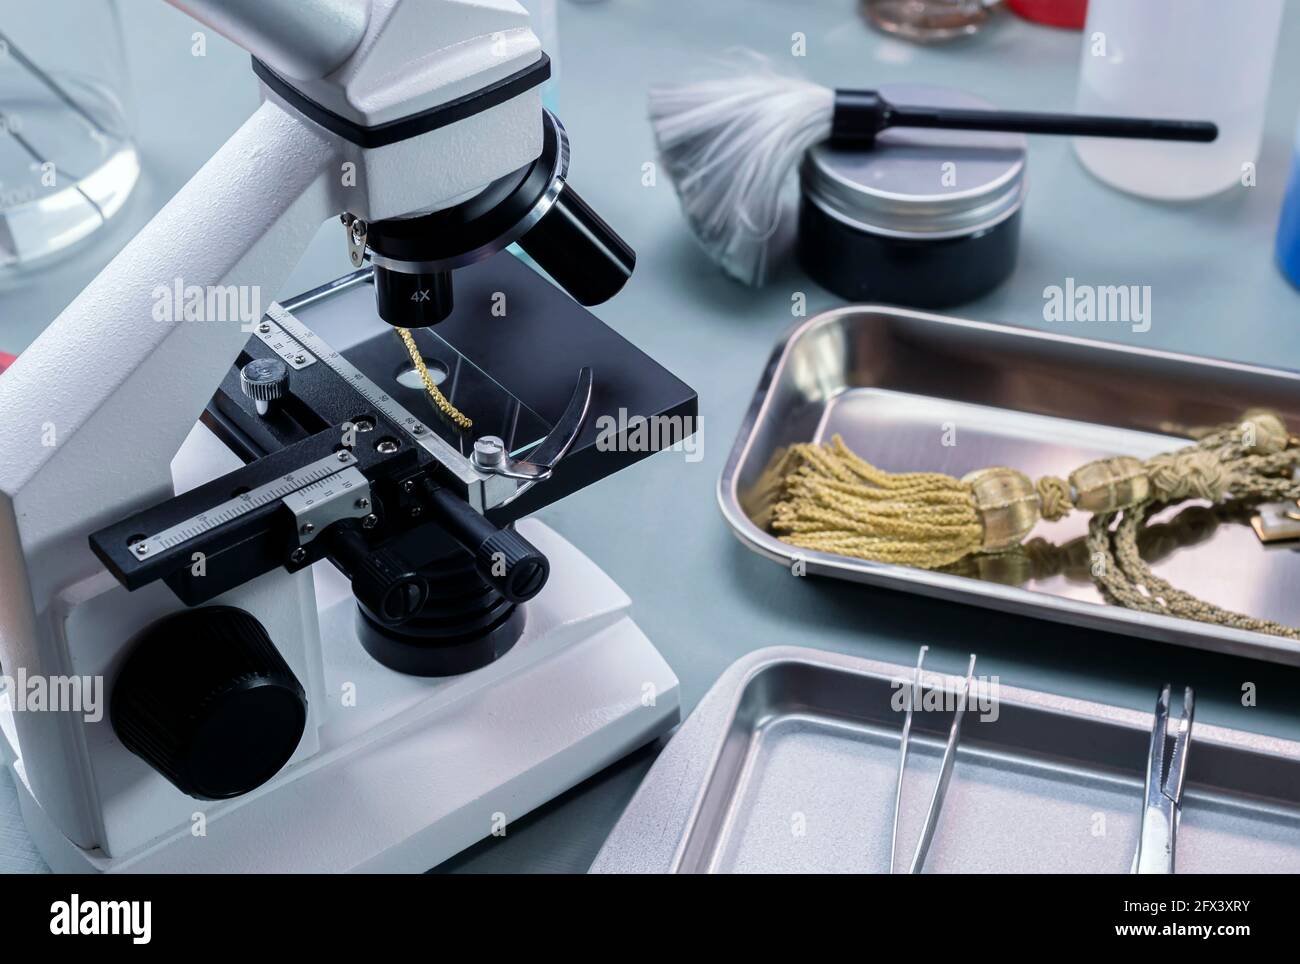 Golden cord under a microscope analysed in a crime lab, concept image Stock Photo